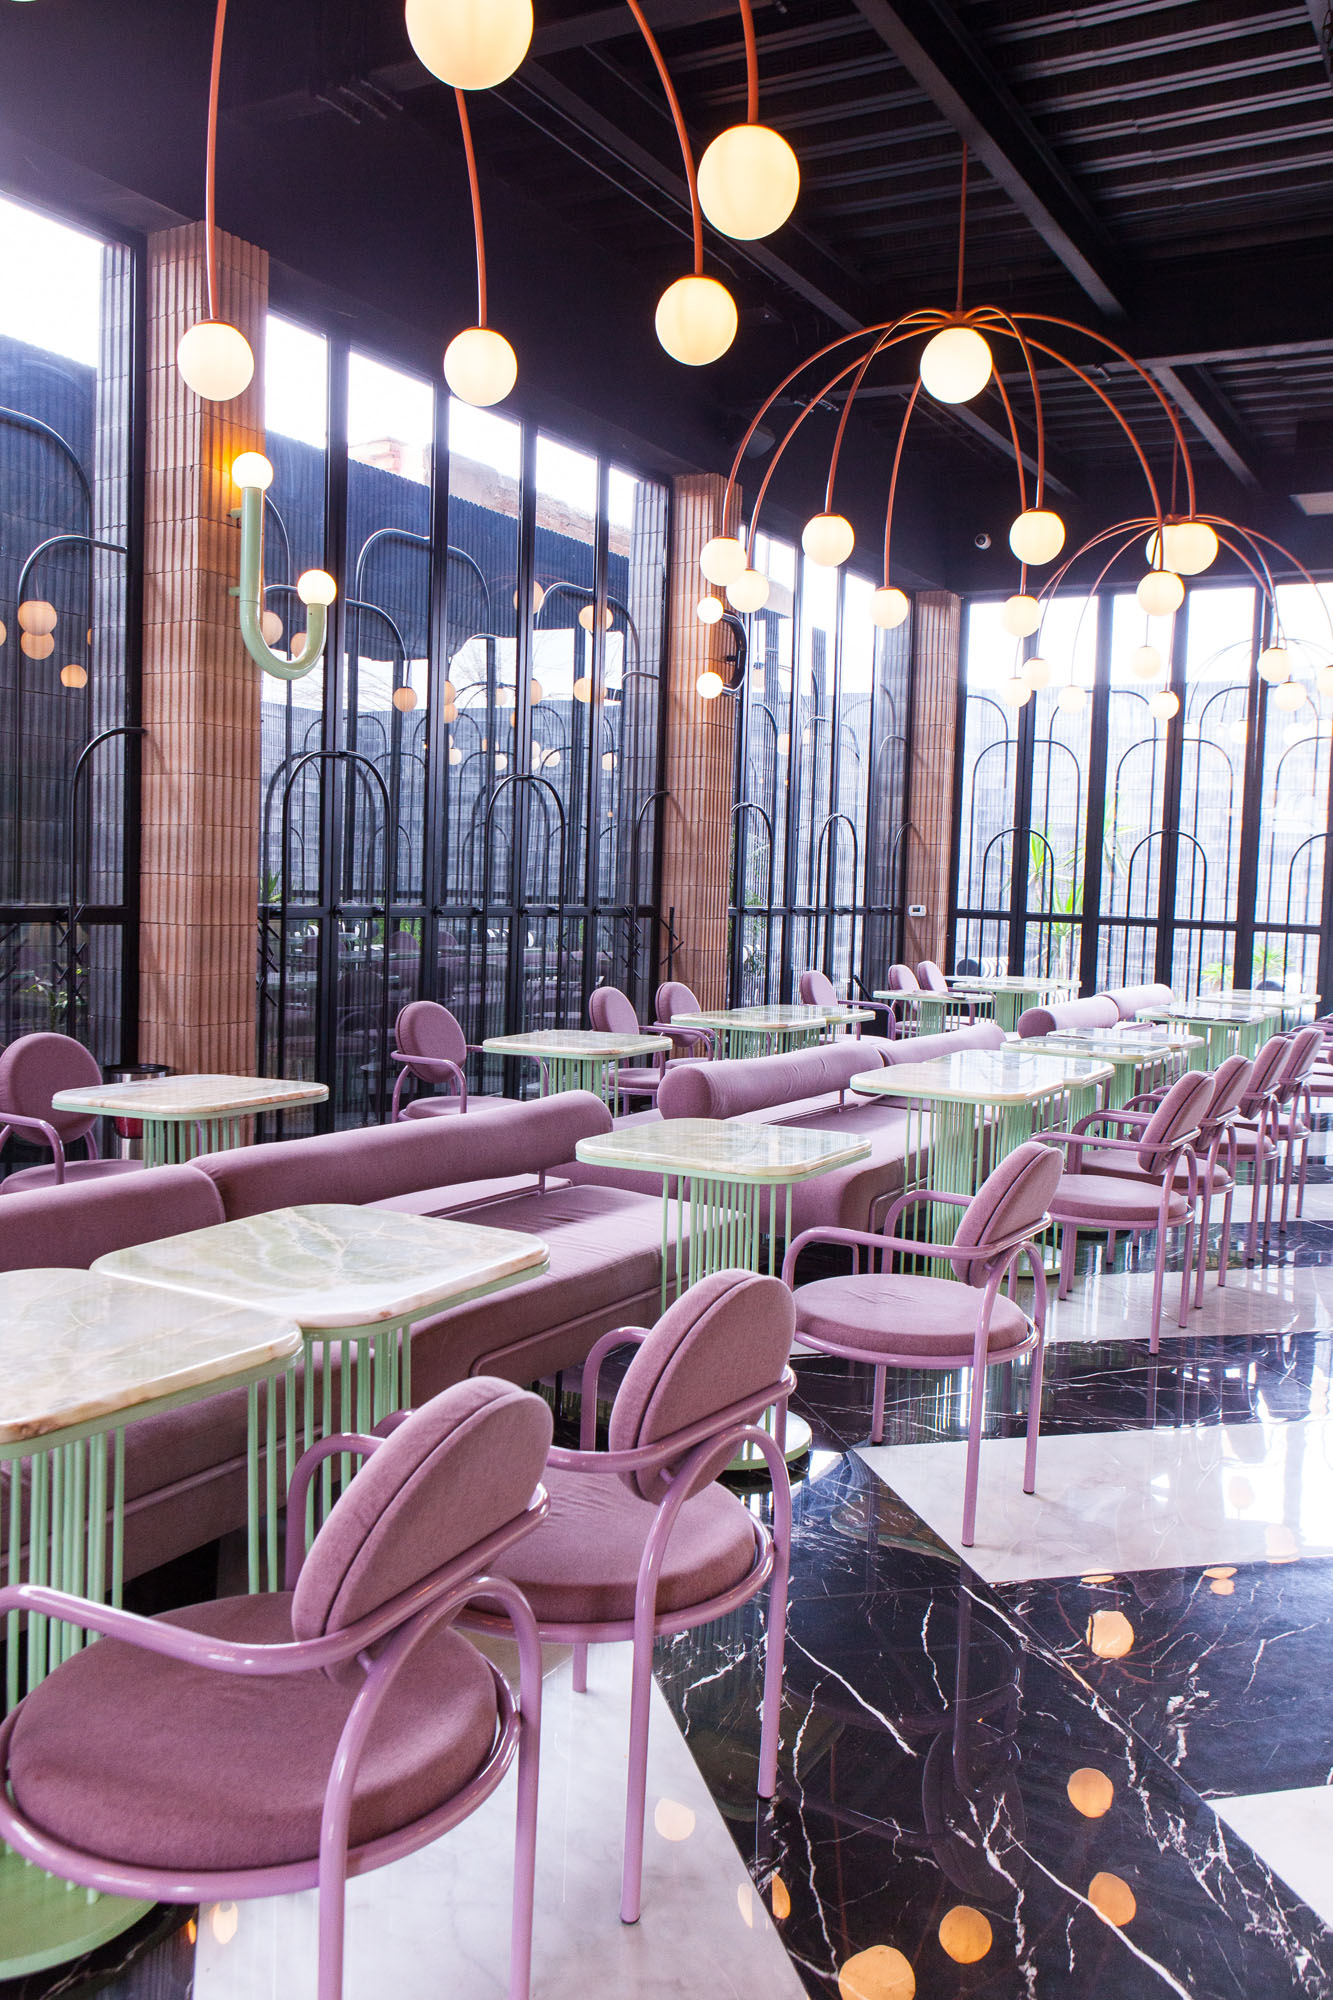 interior of a restaurant showing pastel colored tables